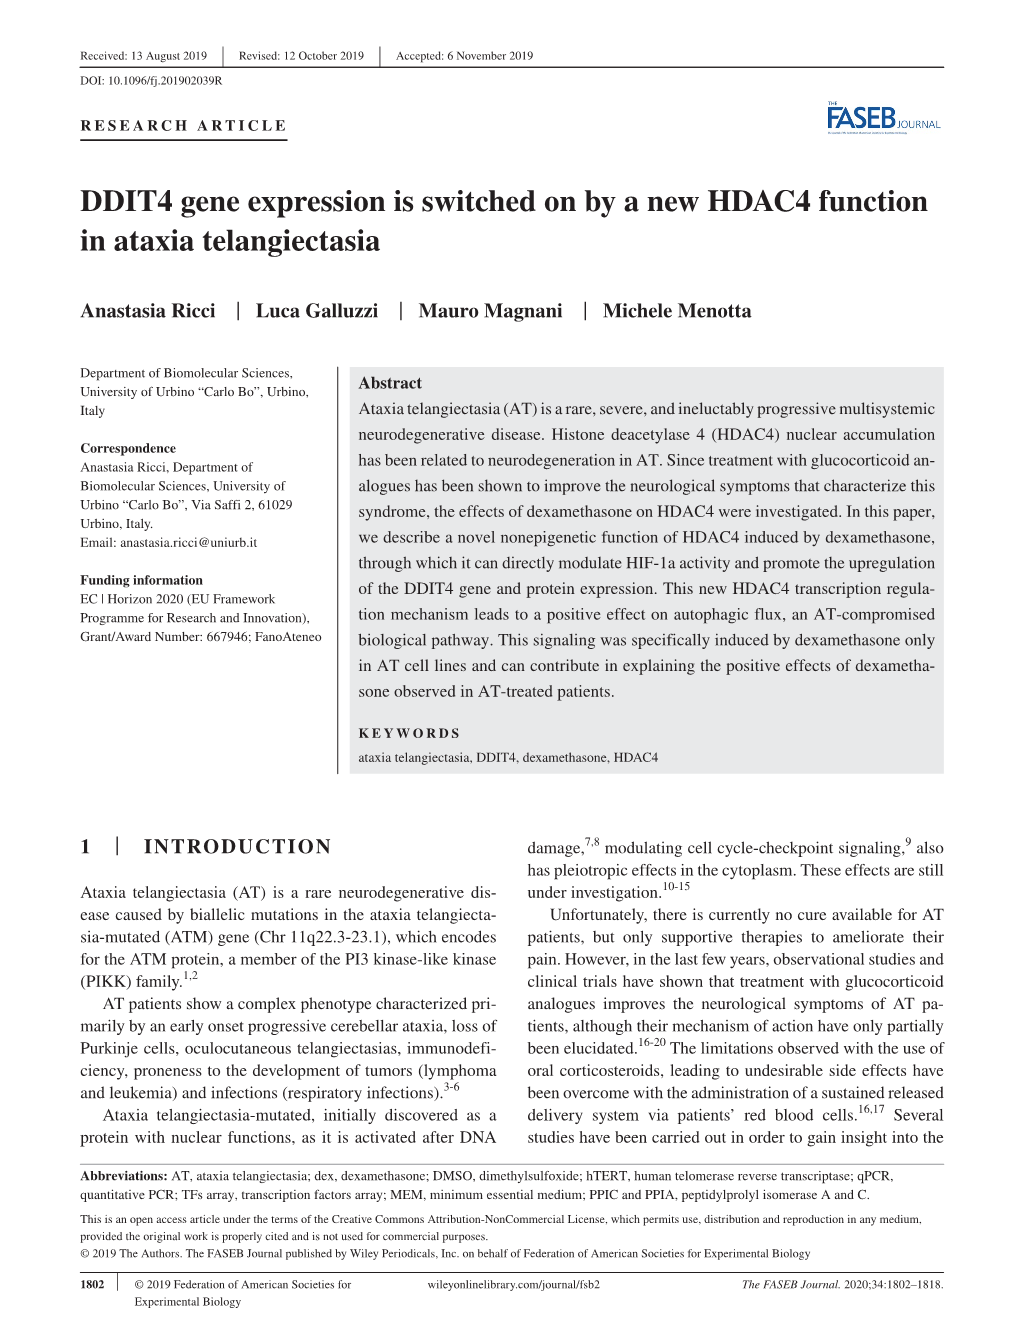 DDIT4 Gene Expression Is Switched on by a New HDAC4 Function in Ataxia Telangiectasia